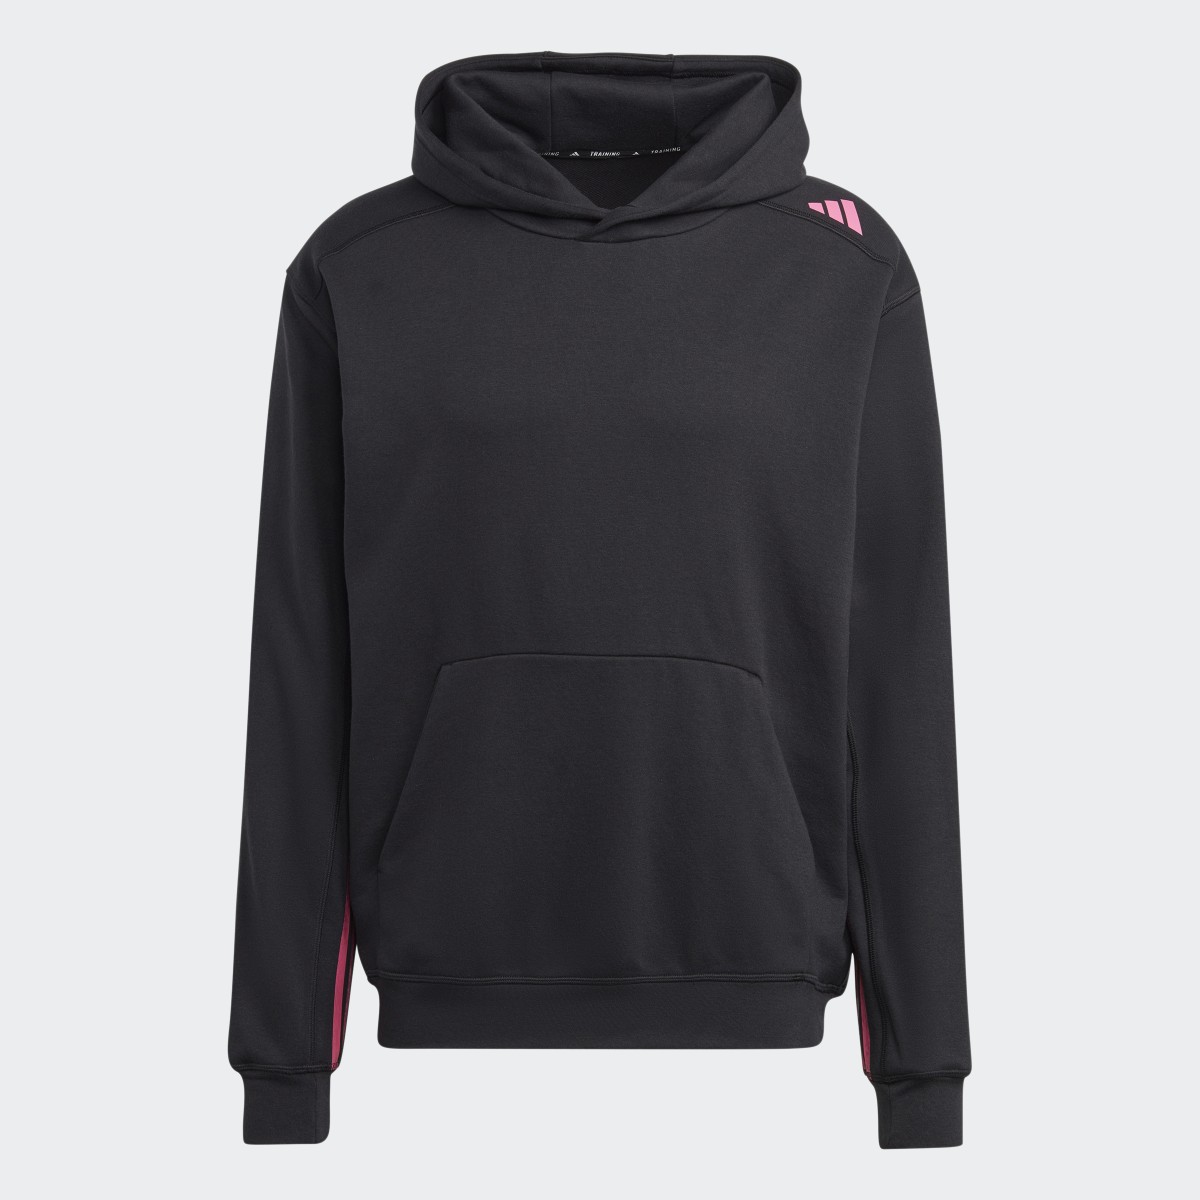 Adidas HIIT Hoodie Curated By Cody Rigsby. 5